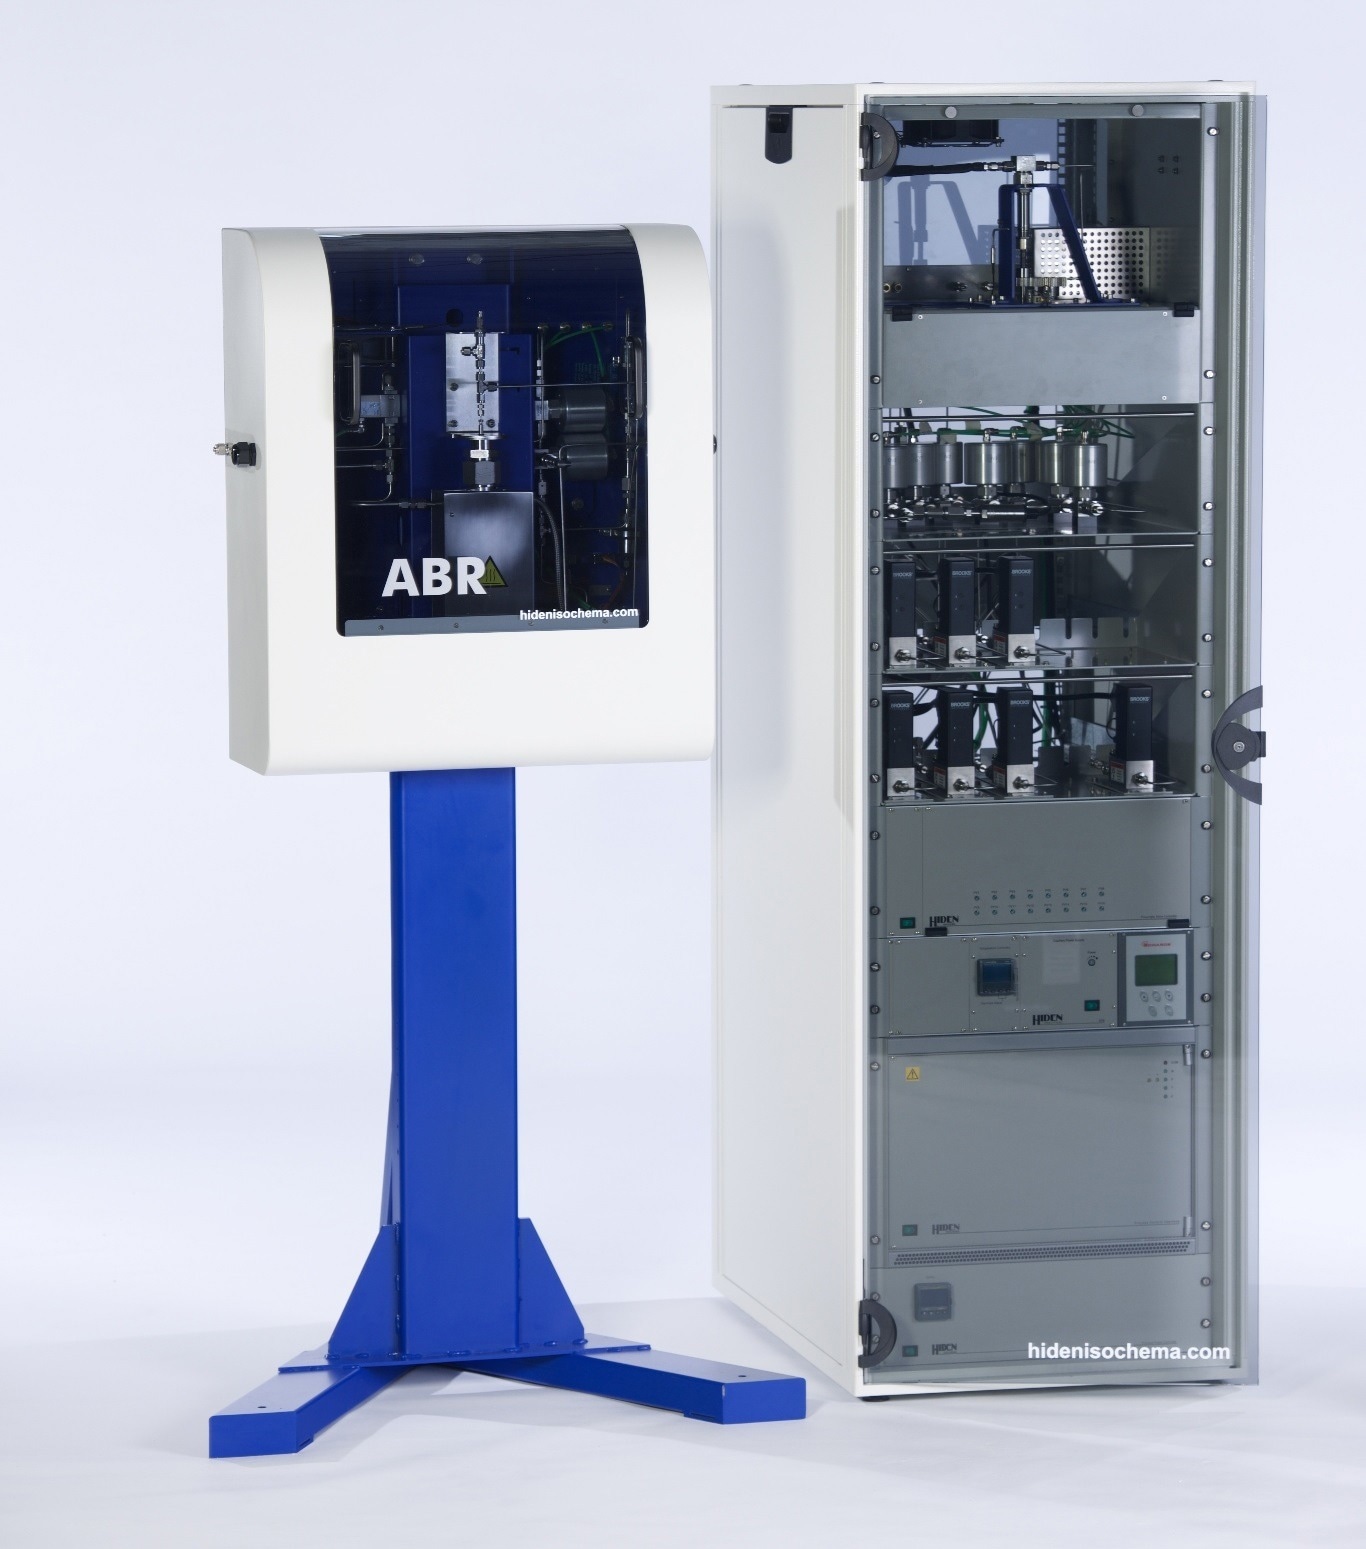 The ABR: A unique high pressure breakthrough analyzer with integrated mass spectrometry